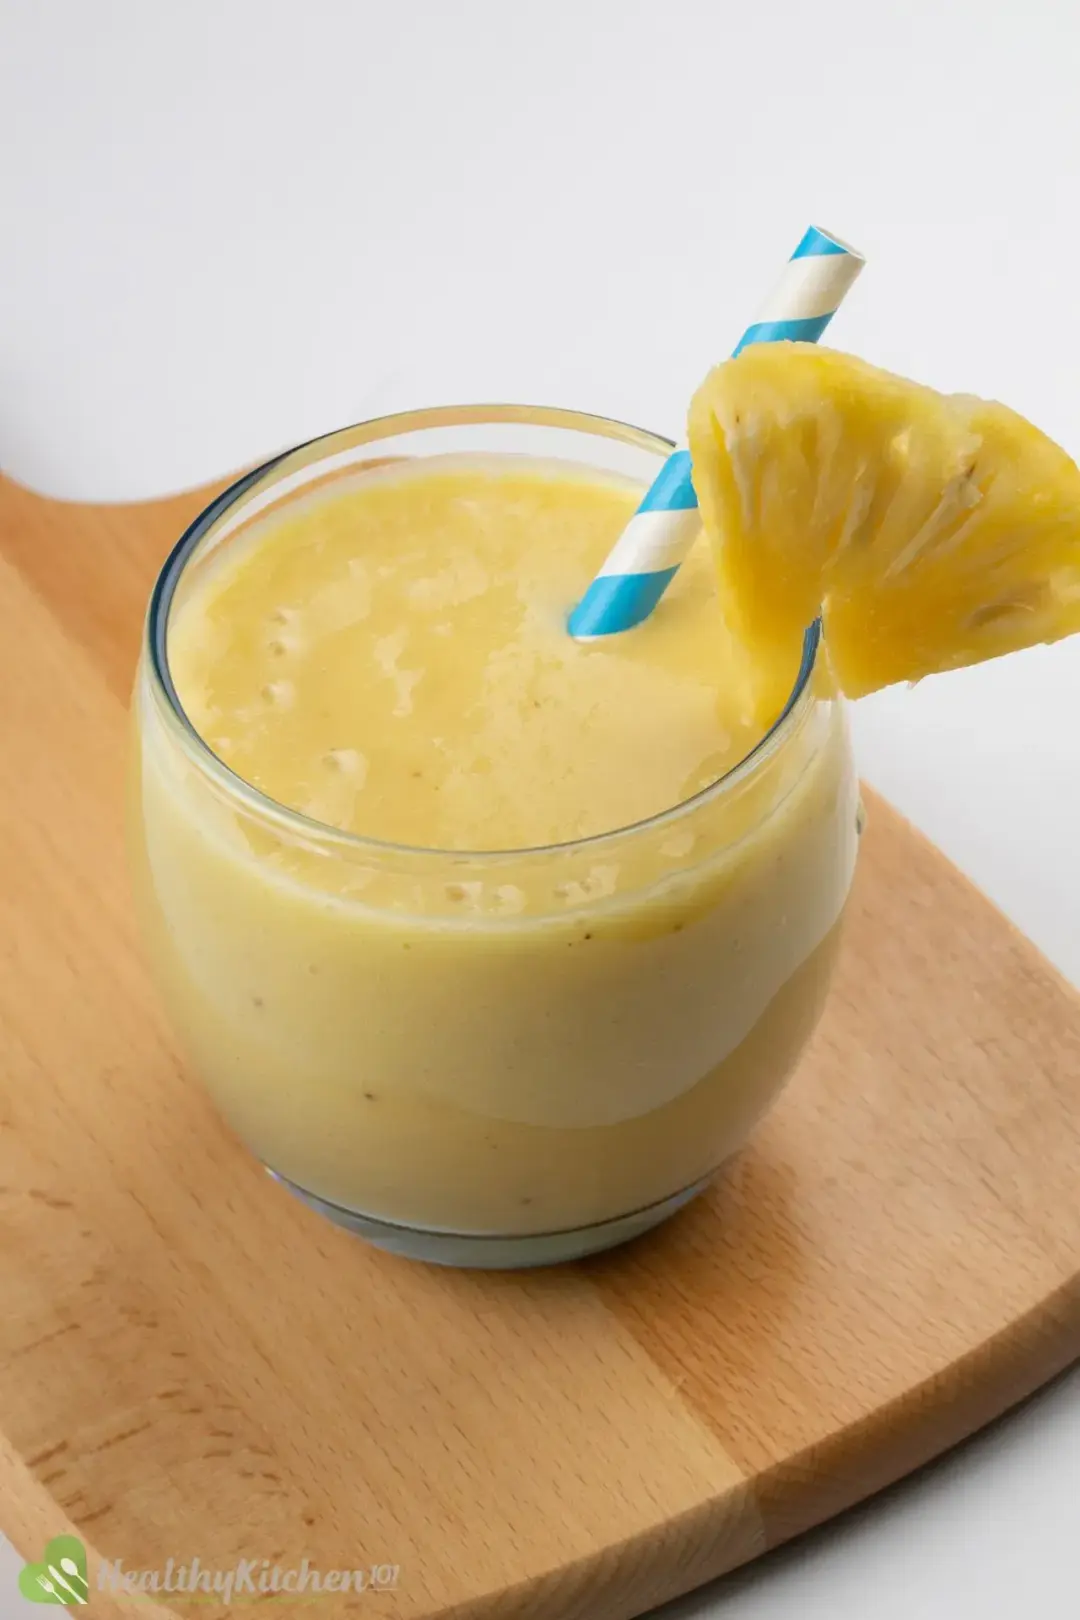 How To Make a Pineapple Smoothie